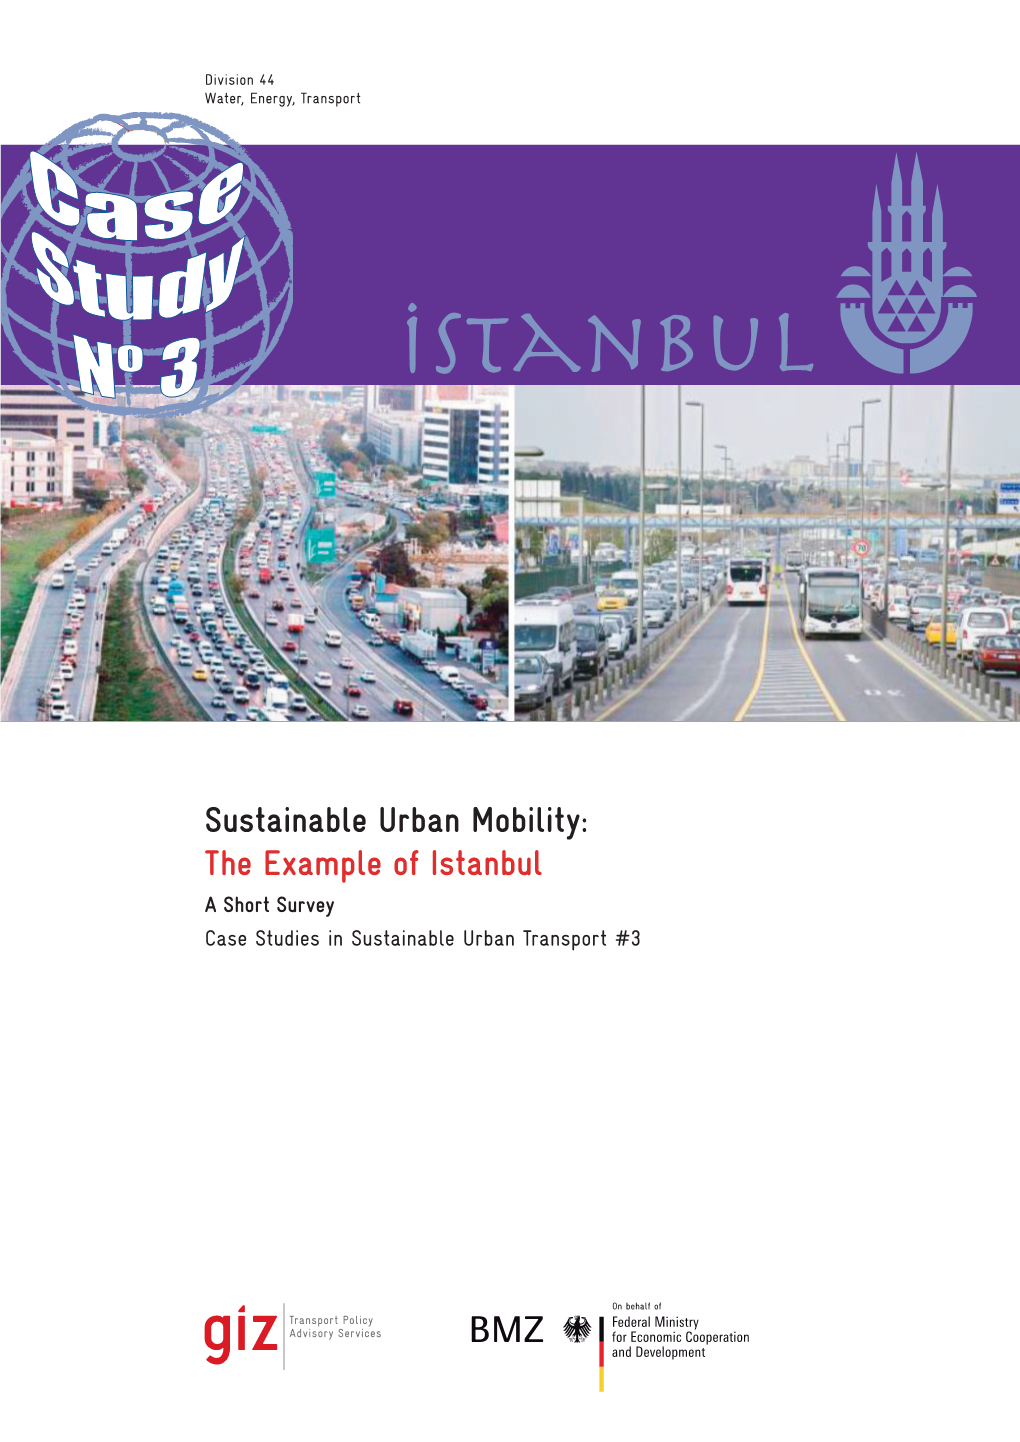 Sustainable Urban Mobility: the Example of Istanbul